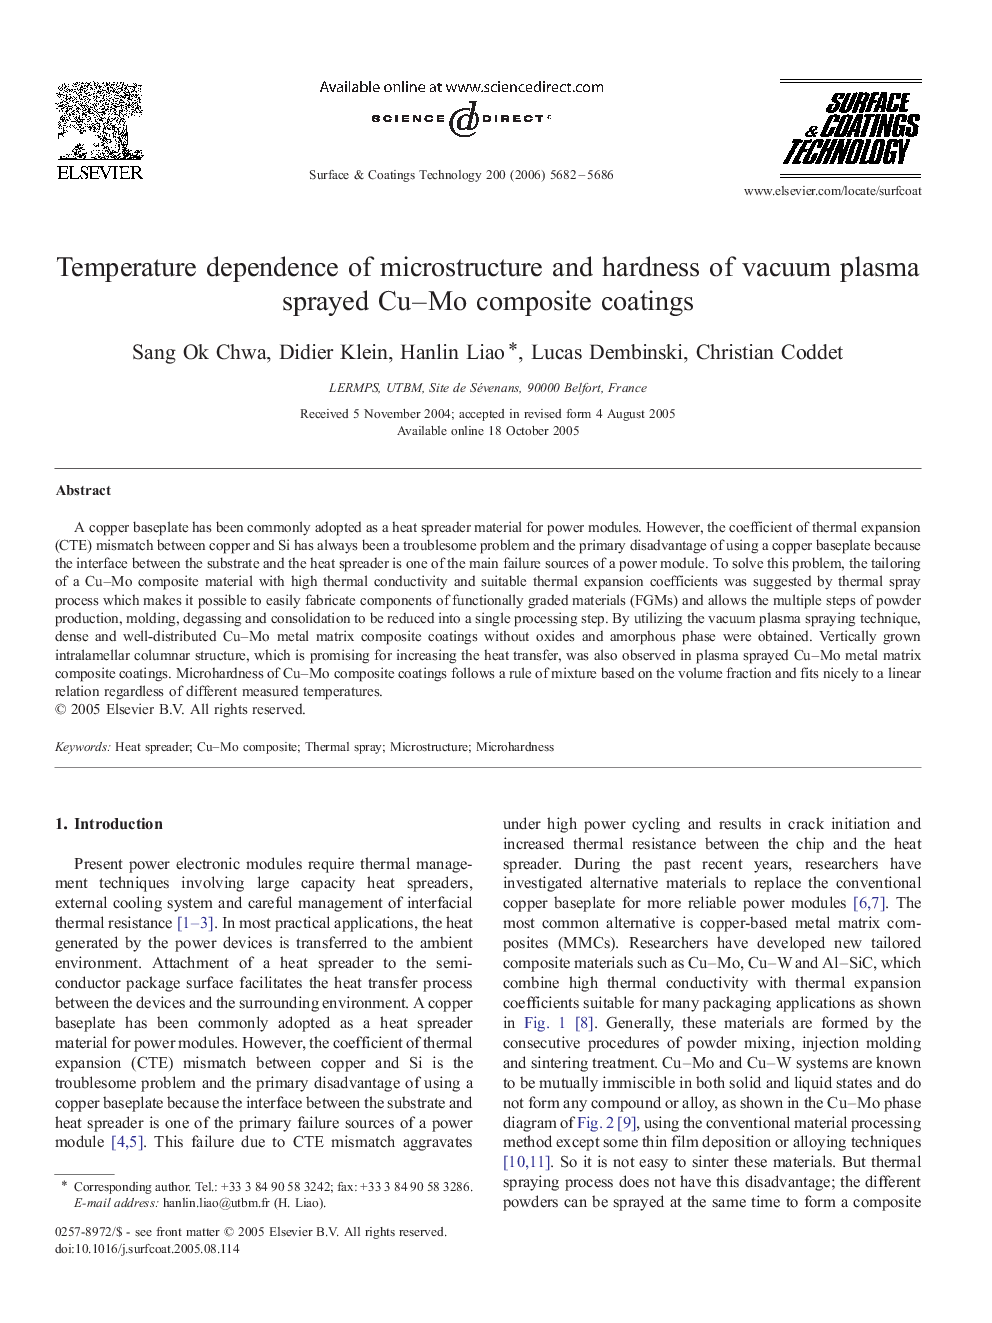 Temperature dependence of microstructure and hardness of vacuum plasma sprayed Cu-Mo composite coatings